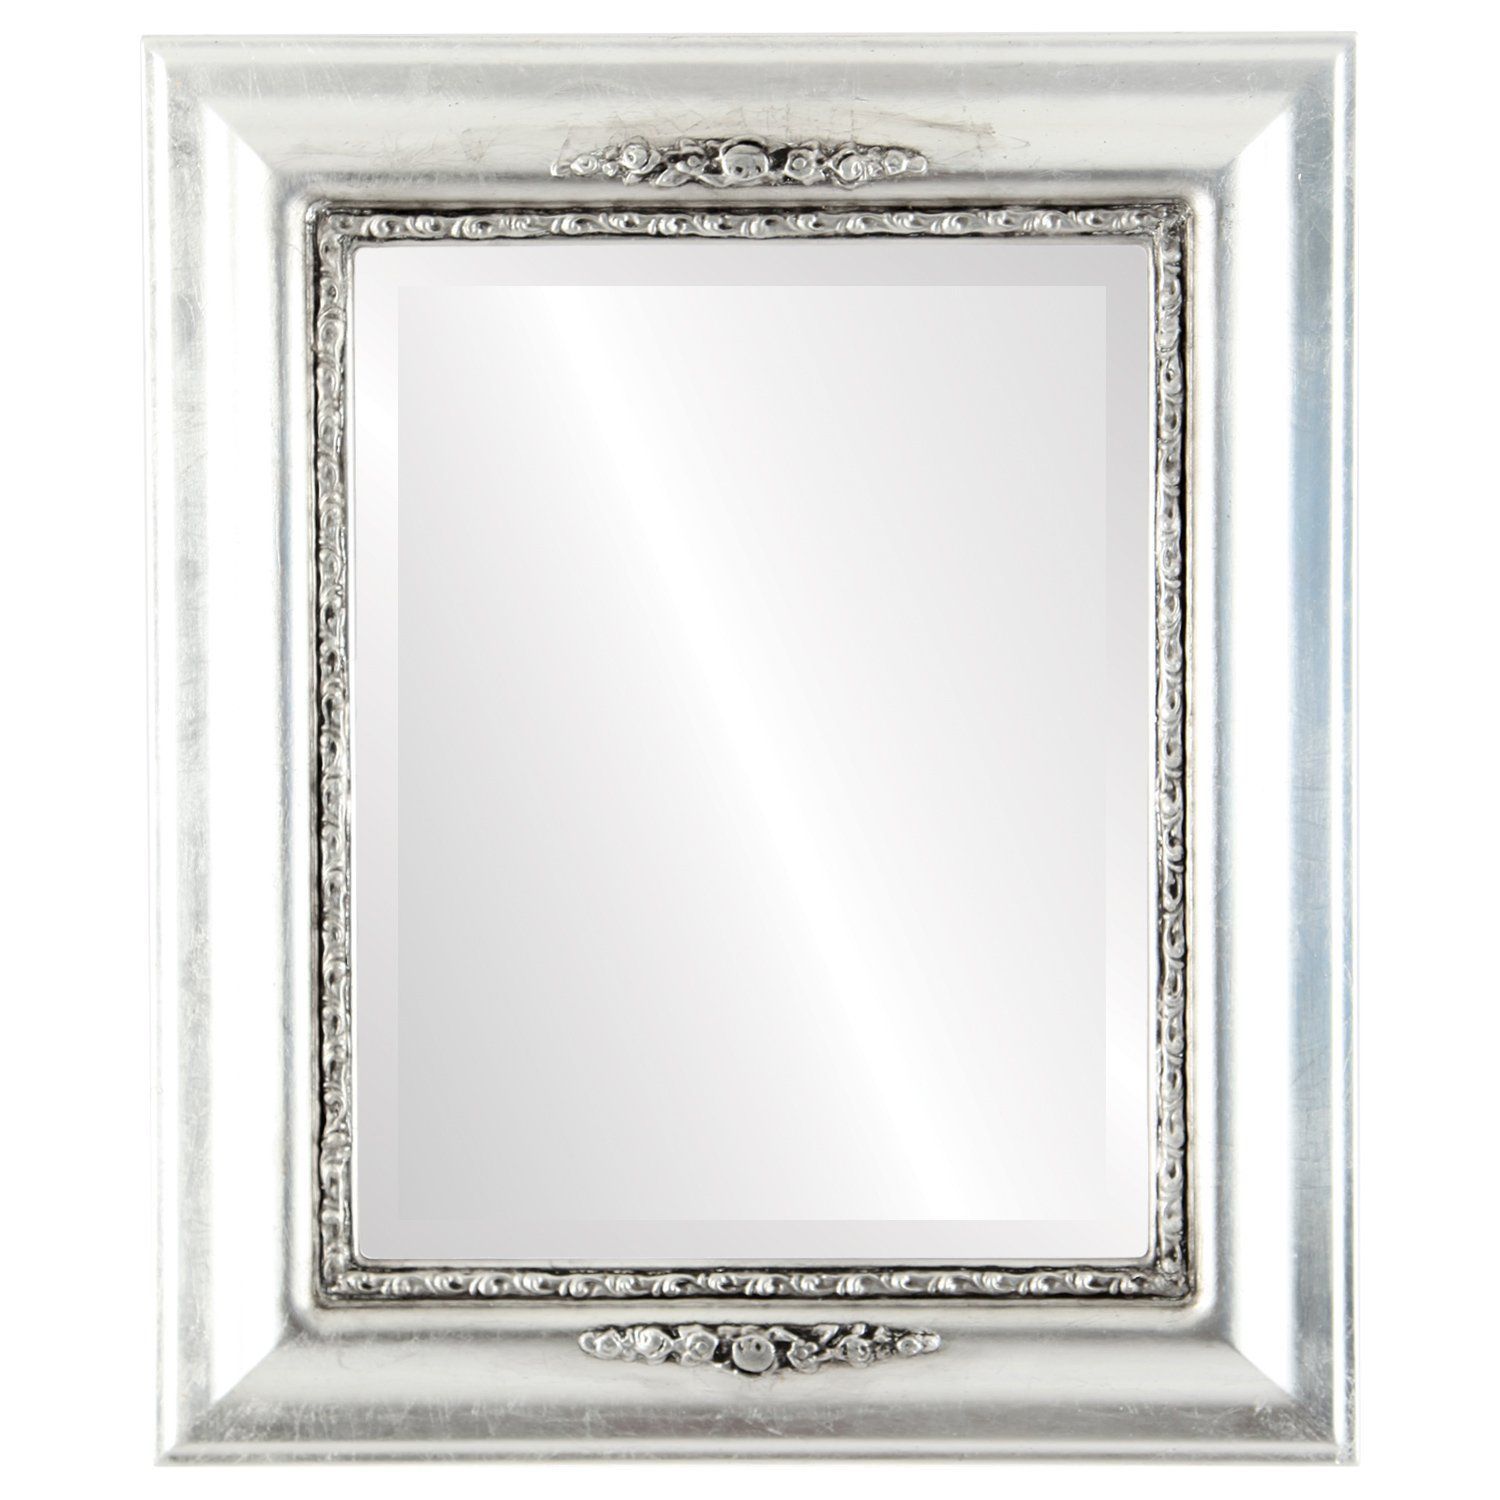 Ovalandroundmirrors Rectangle Beveled Mirror In A Boston Style Throughout Metallic Gold Leaf Wall Mirrors (View 1 of 15)